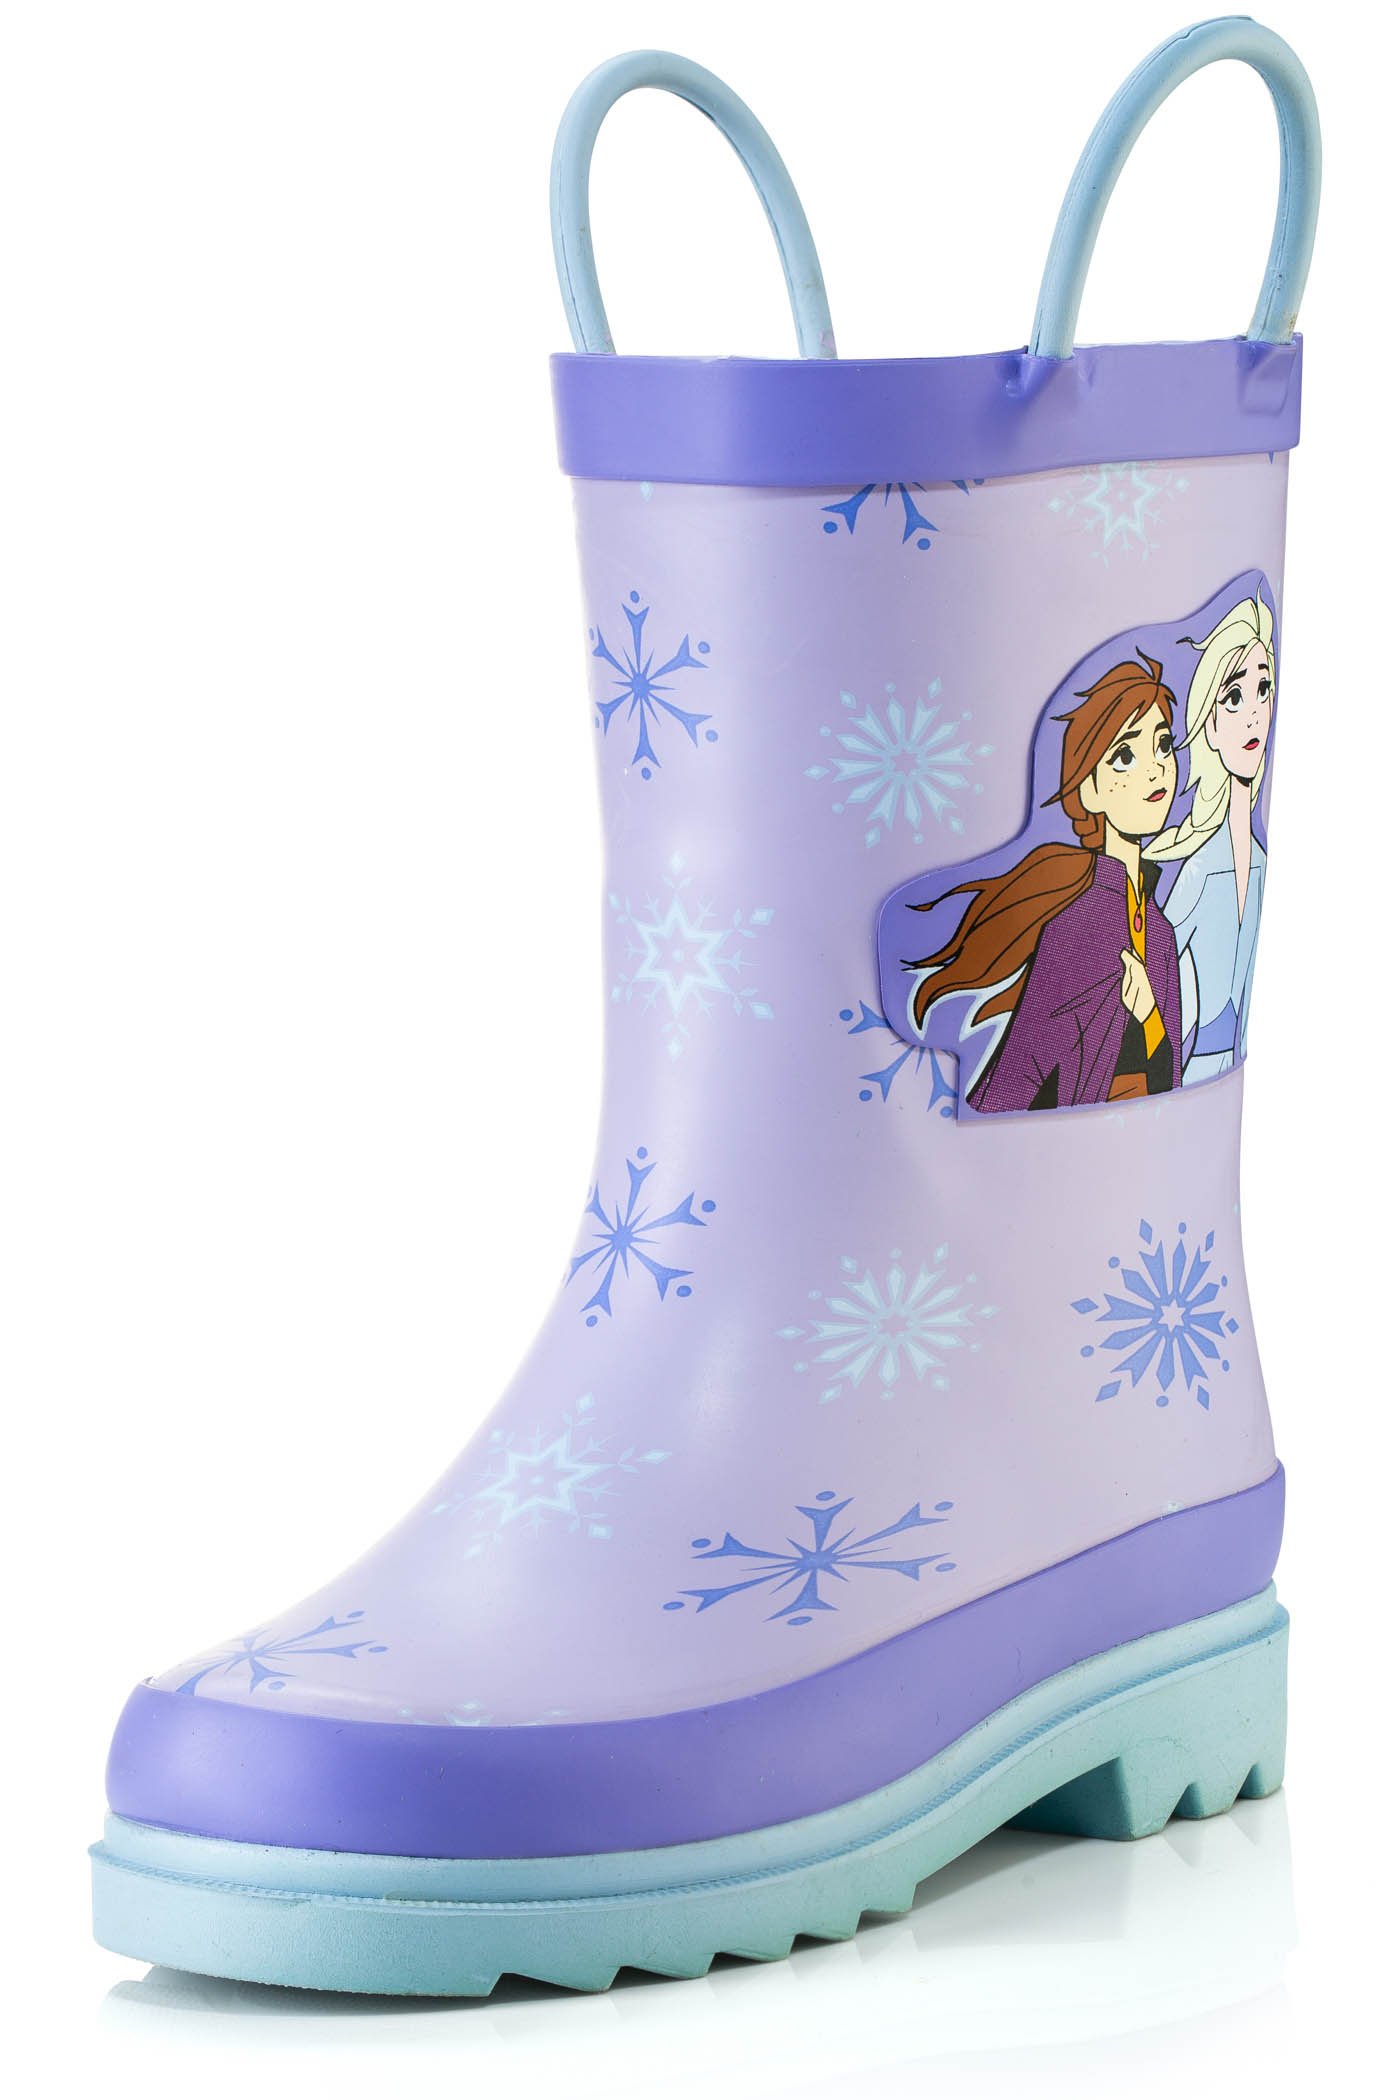 Disney Frozen 2 Girls Anna and Elsa Purple Rubber Easy-On Rain Boots&nbsp;- Size 8 Toddler - image 1 of 7